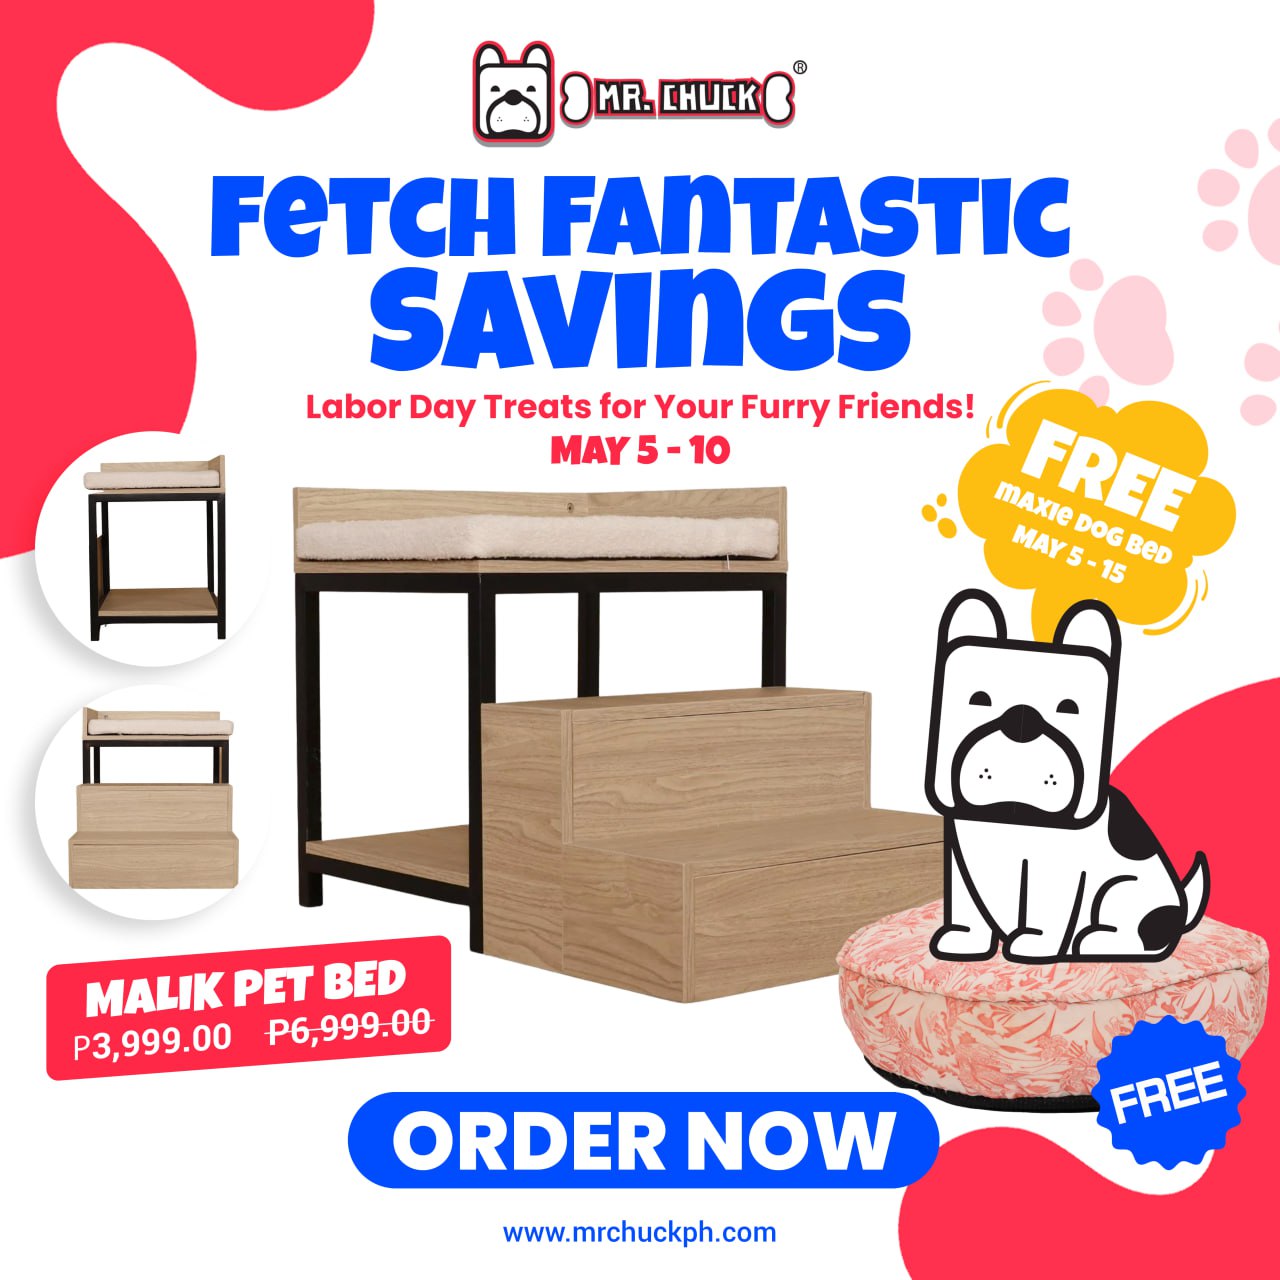 [FREE Maxie Dog Bed] MALIK Pet Bed with Steps | Fetch Fantastic Savings Mr. Chuck Pet Store